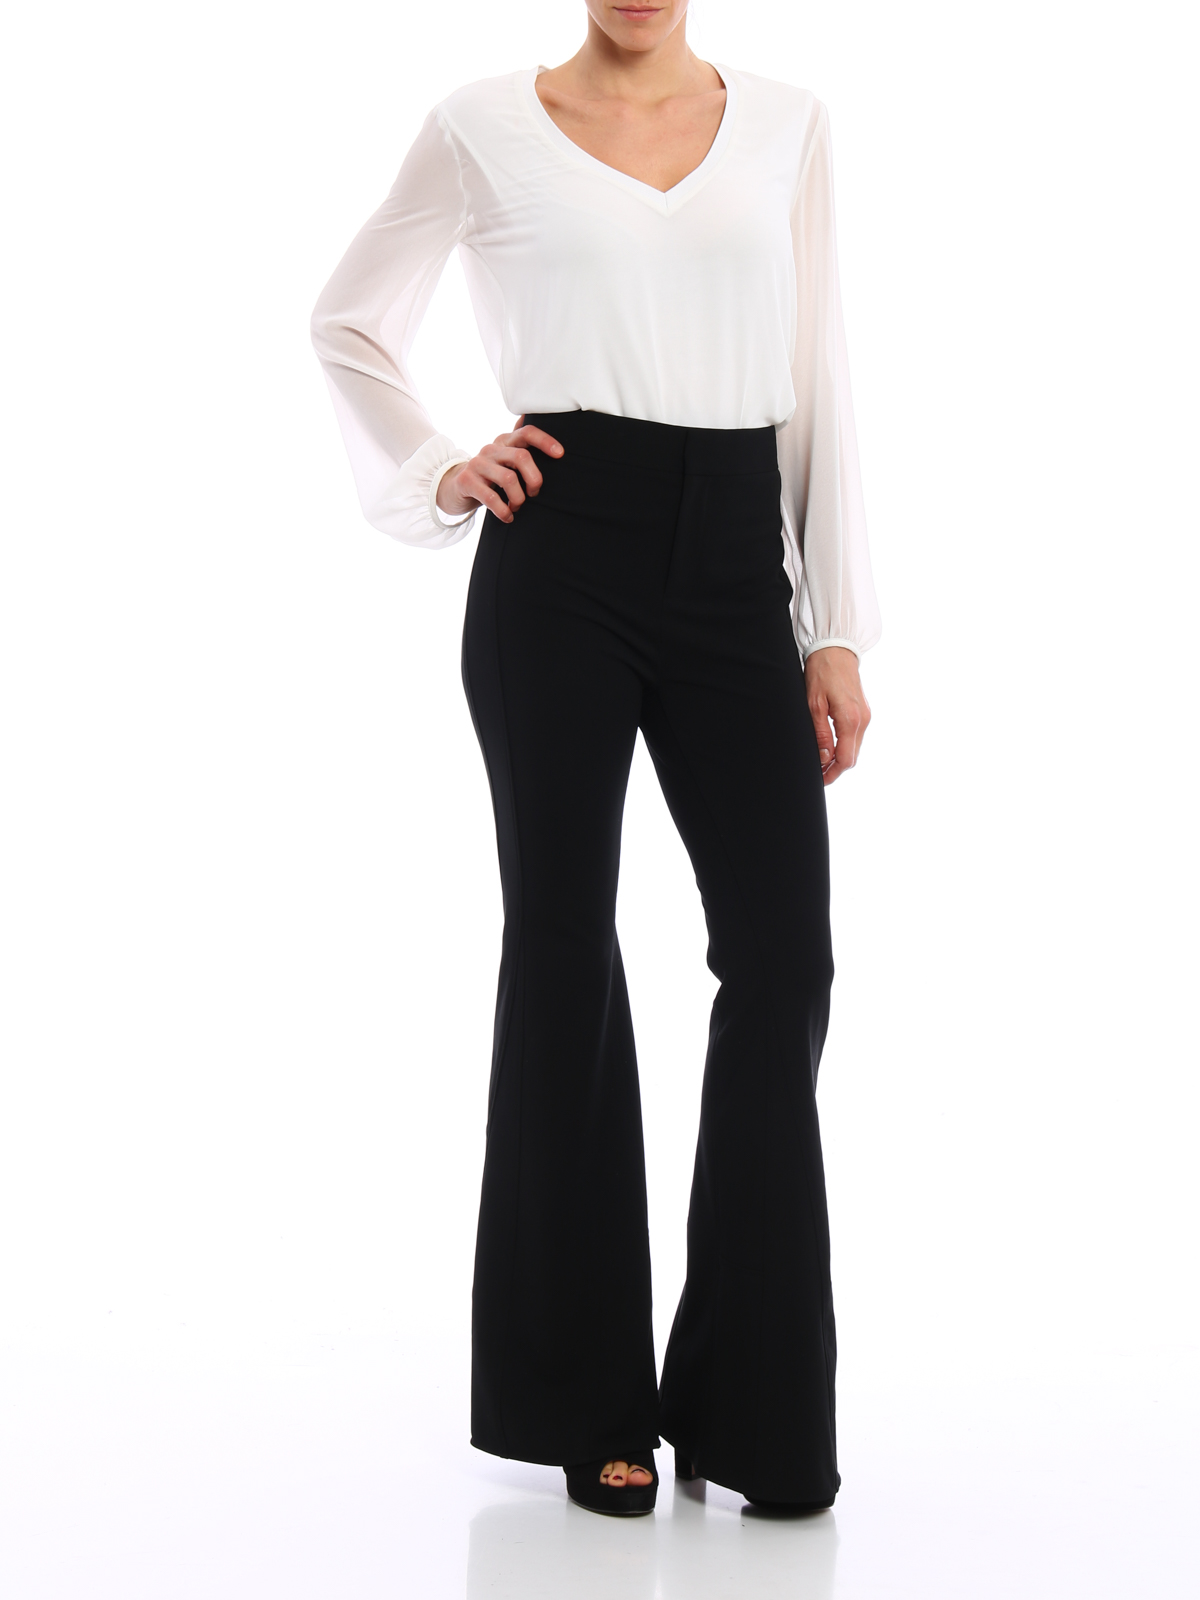 Buy Women Olive High Waist Flared Trousers  Formal Trousers Online India   FabAlley